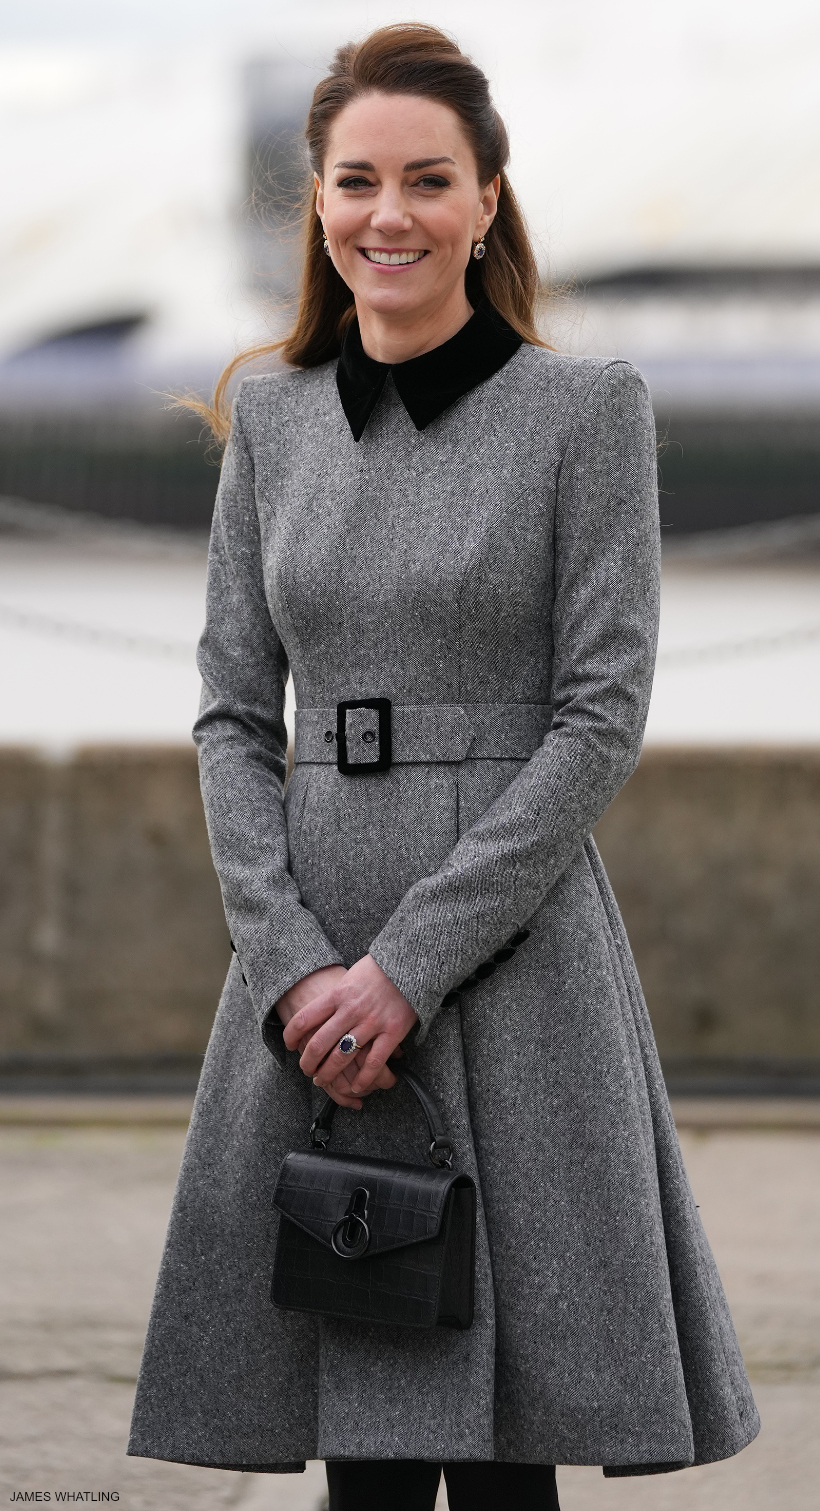 The Duchess of Cambridge (Kate Middleton) wearing a smart grey coat dress.  She carries a black croc-print bag with matching black hardware. 